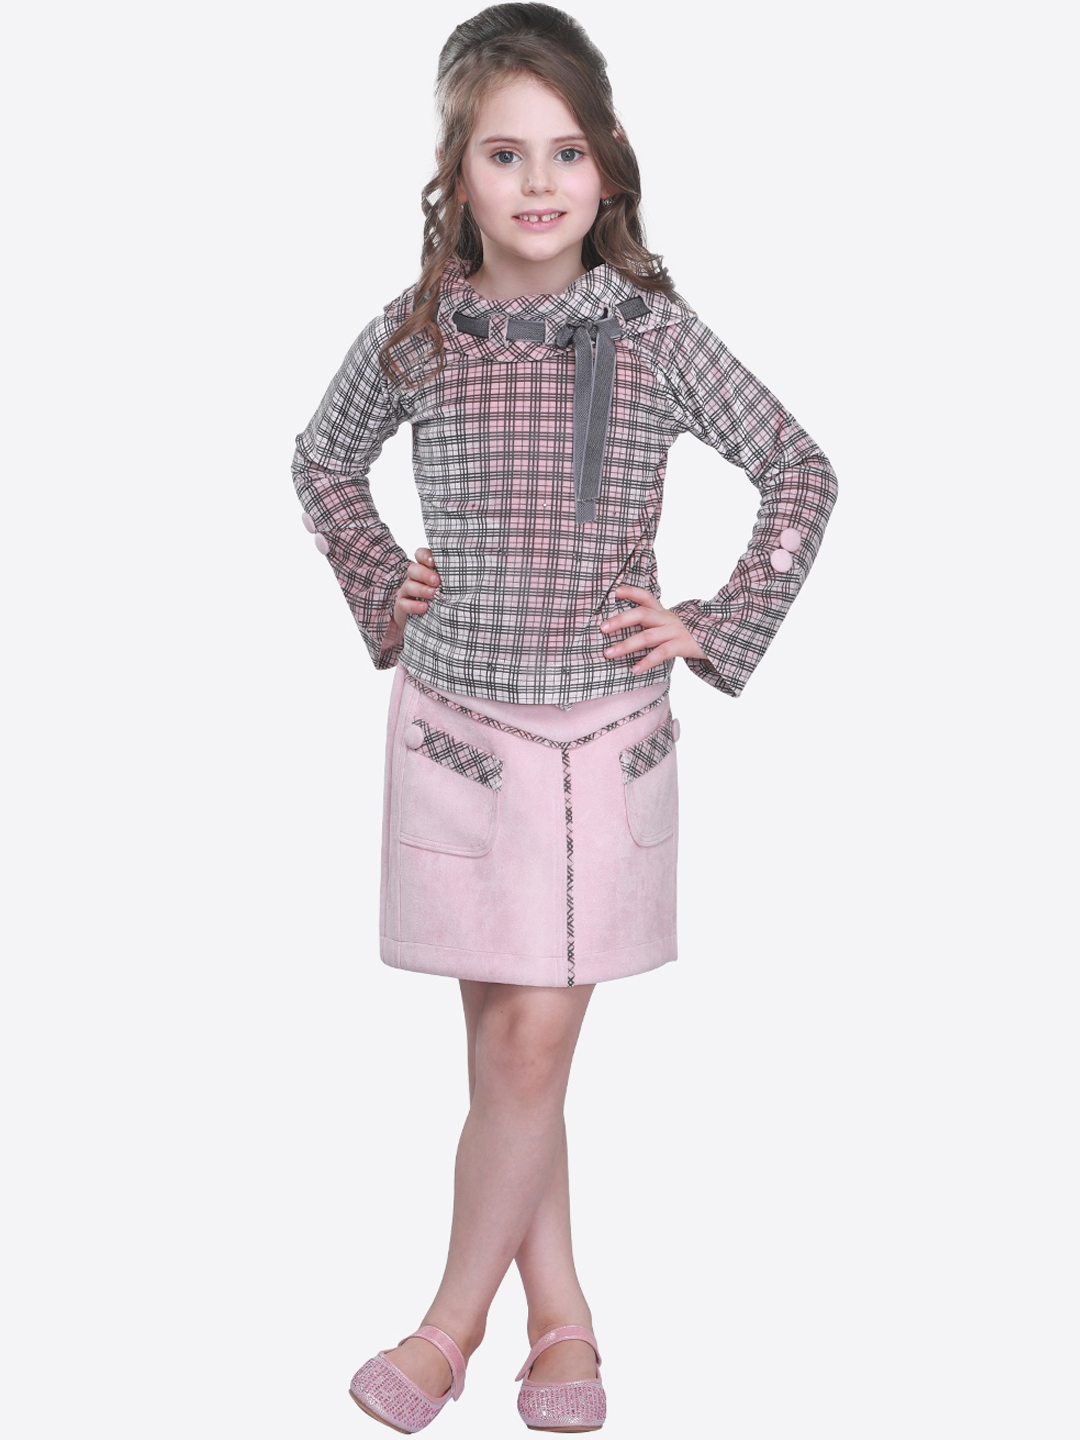 Grey Skirt And Pink Top Ficts